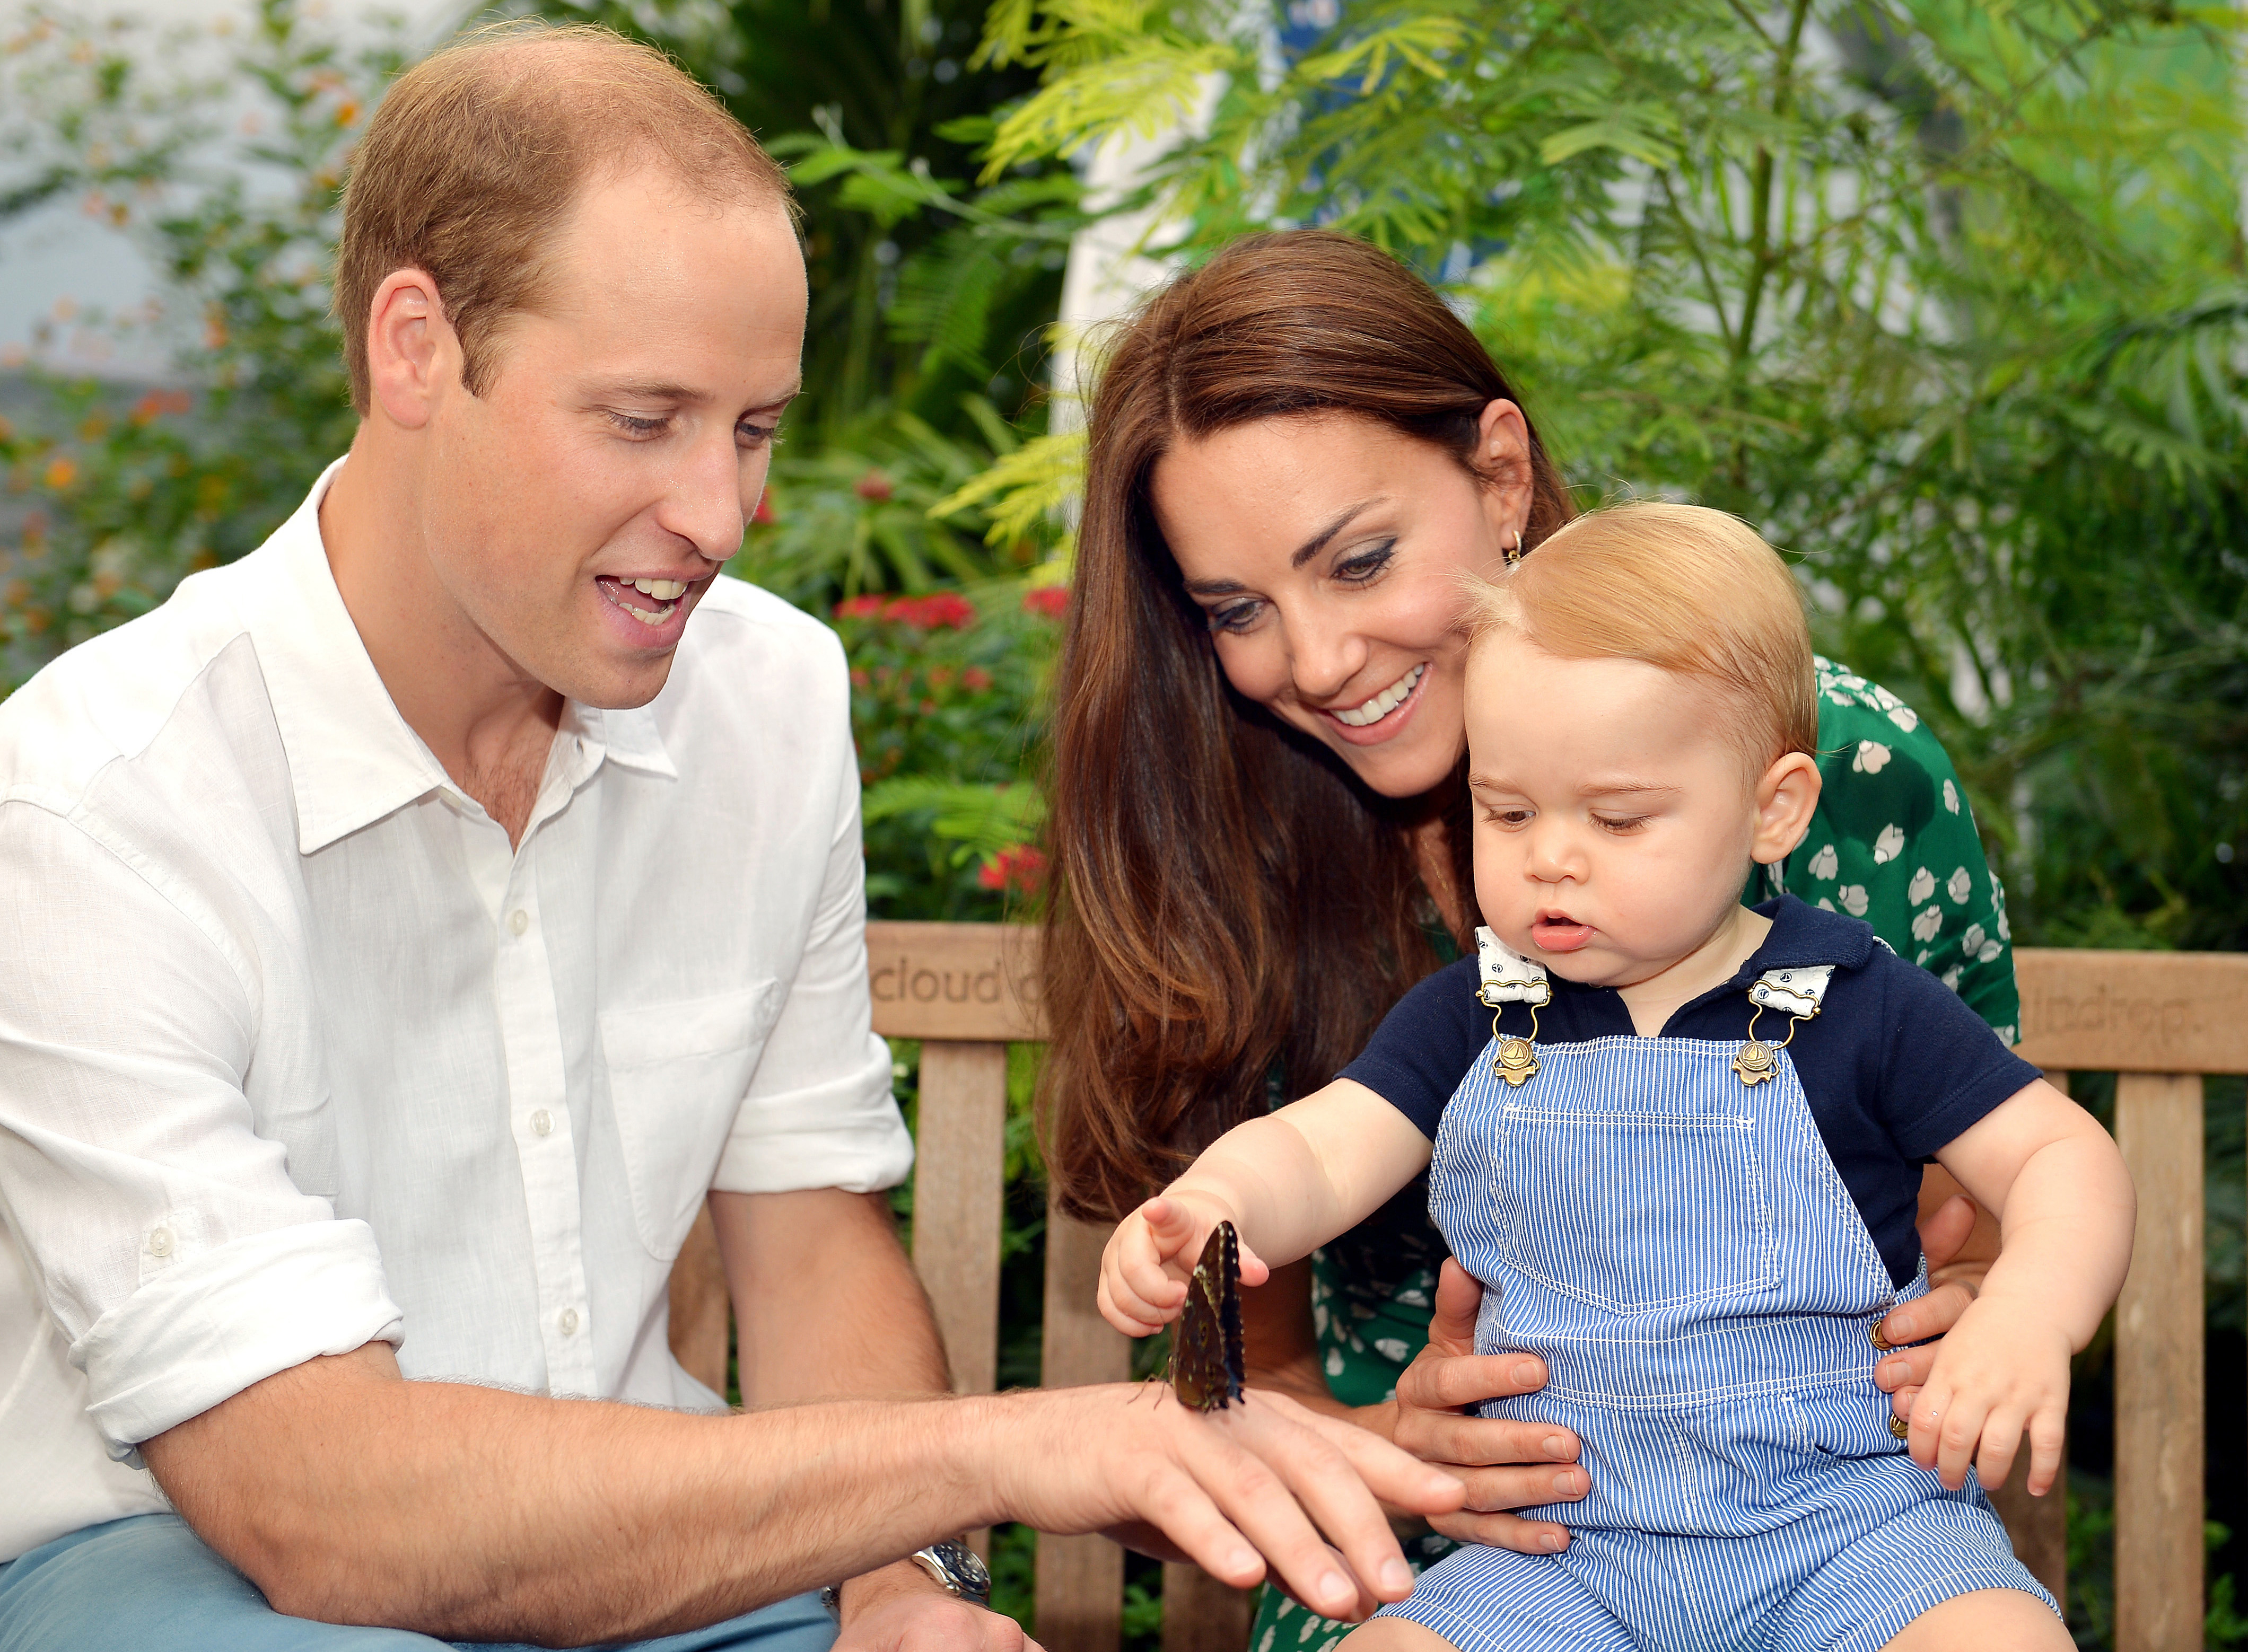 Prince-George-First-Birthday-Will-Kate (2)